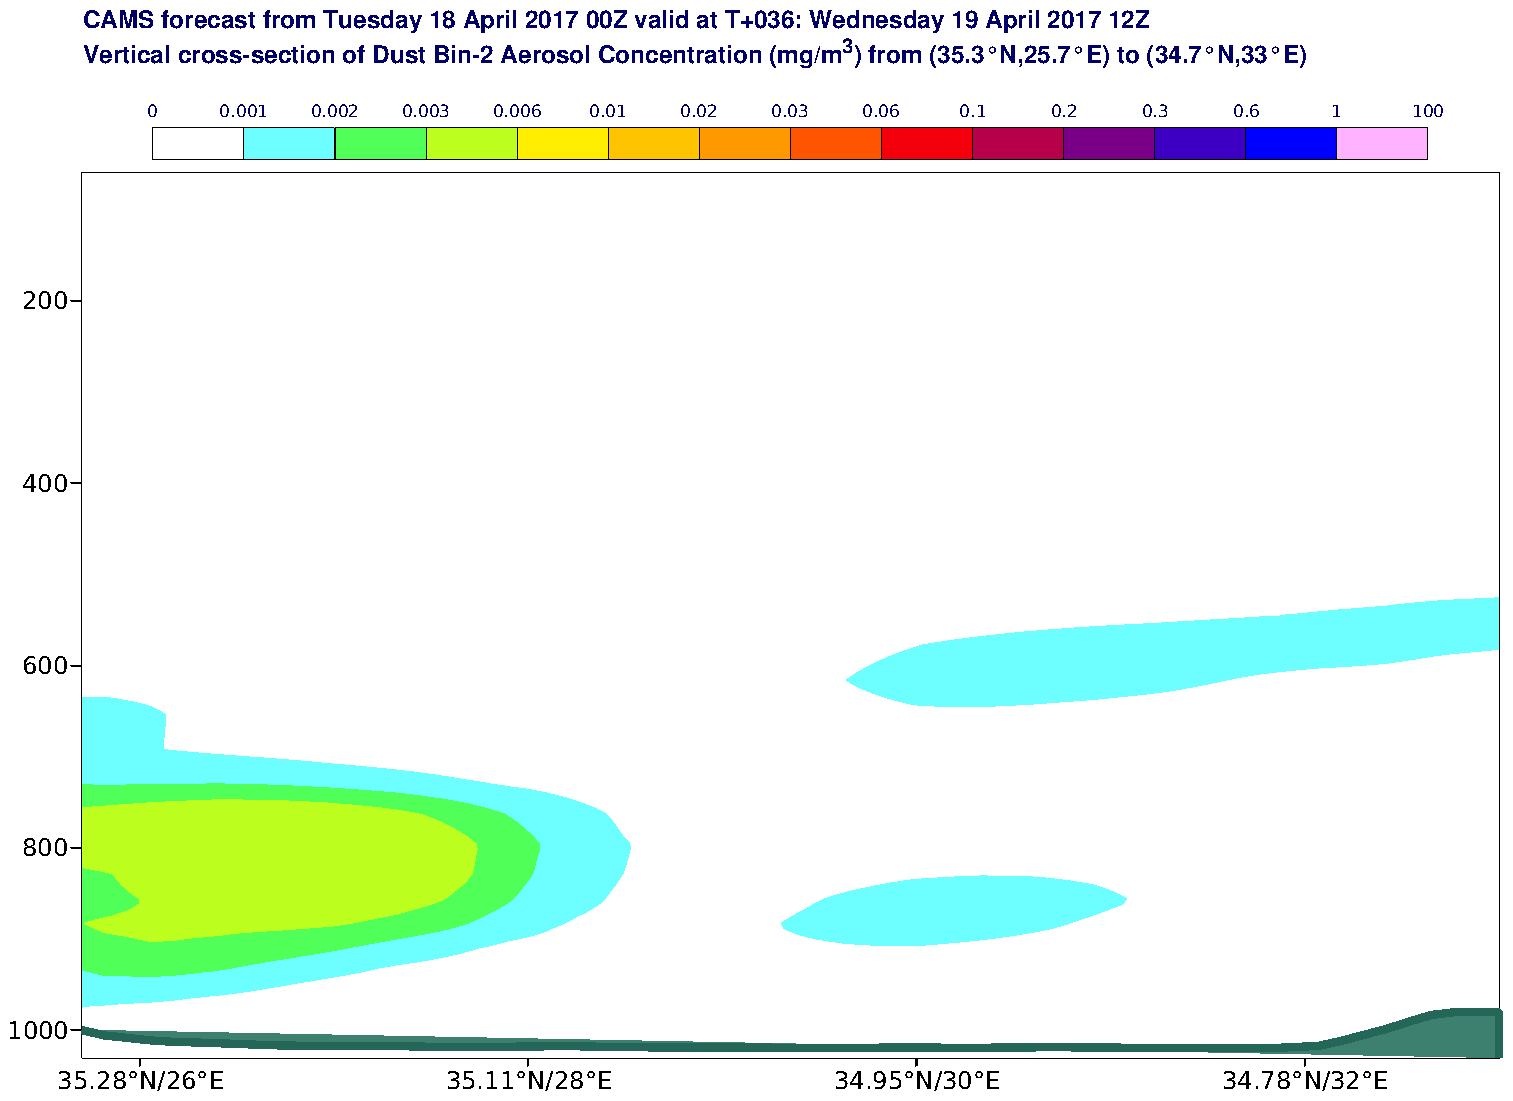 Vertical cross-section of Dust Bin-2 Aerosol Concentration (mg/m3) valid at T36 - 2017-04-19 12:00